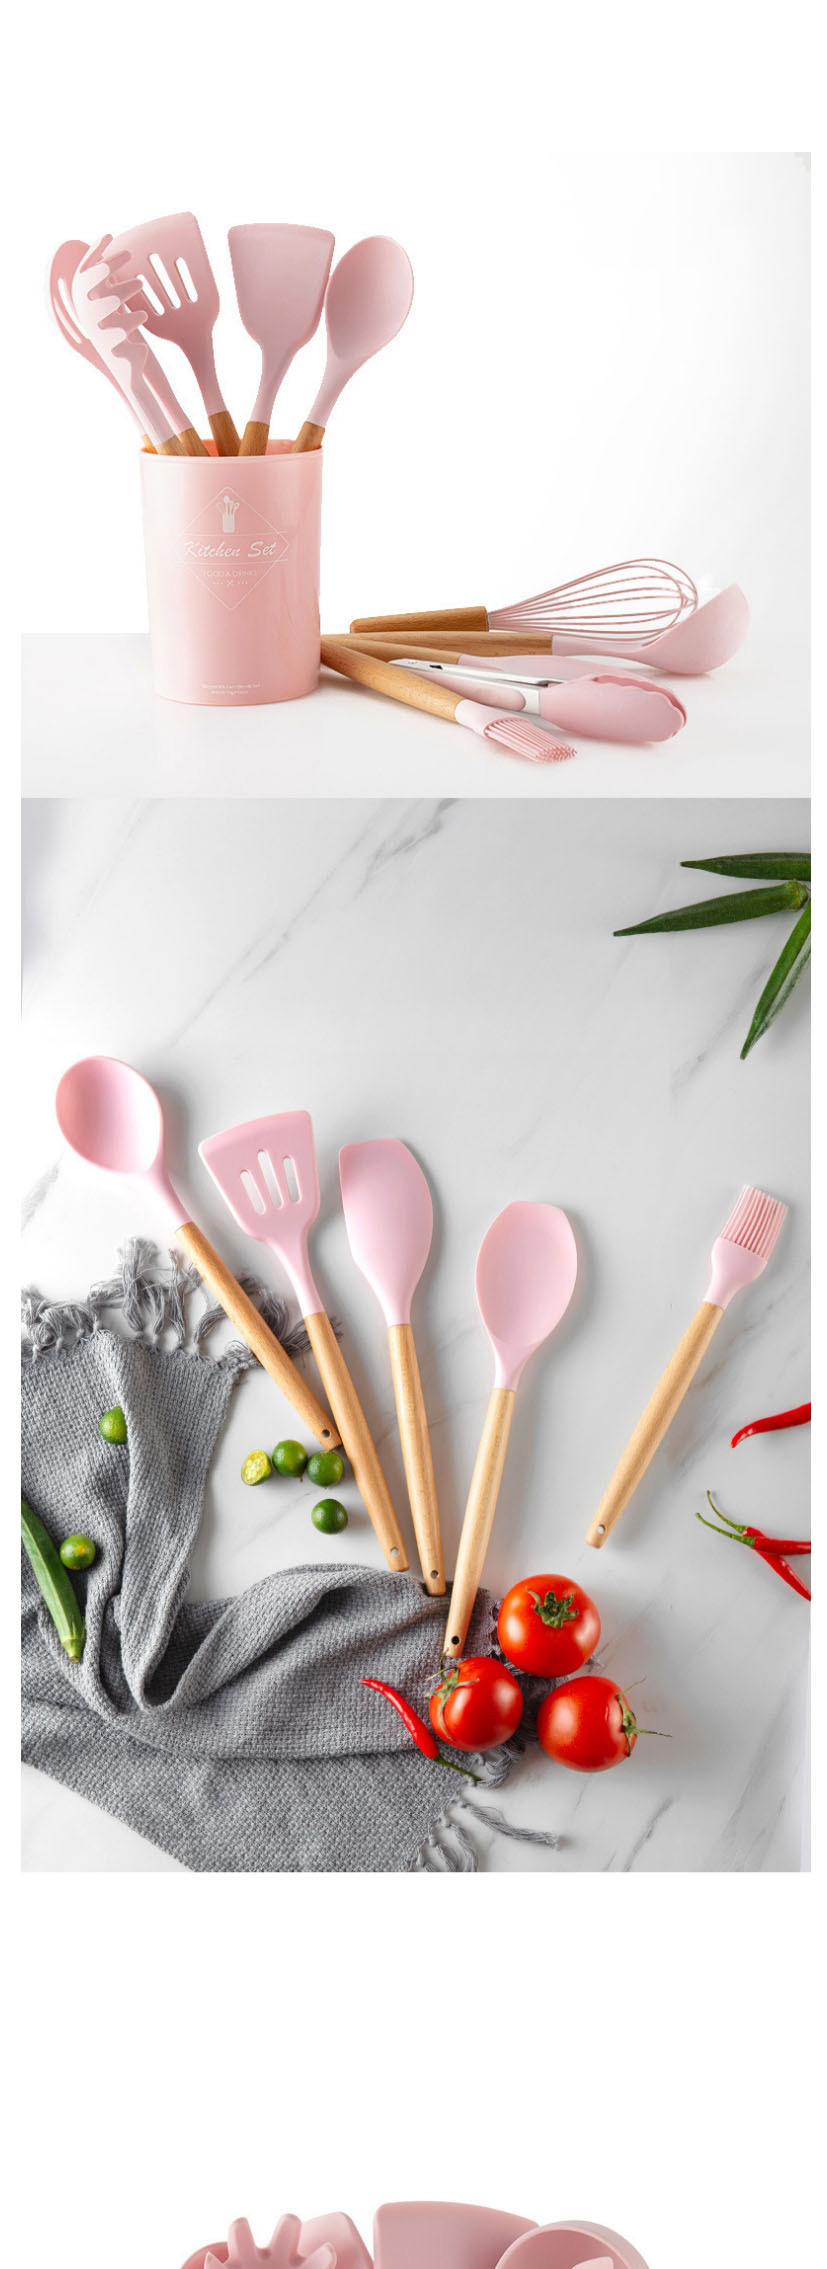 Fashion Nine Piece B (containing Bucket) Pink Solid Wood Handle With Bucket And Silica Gel Kitchenware,Kitchen